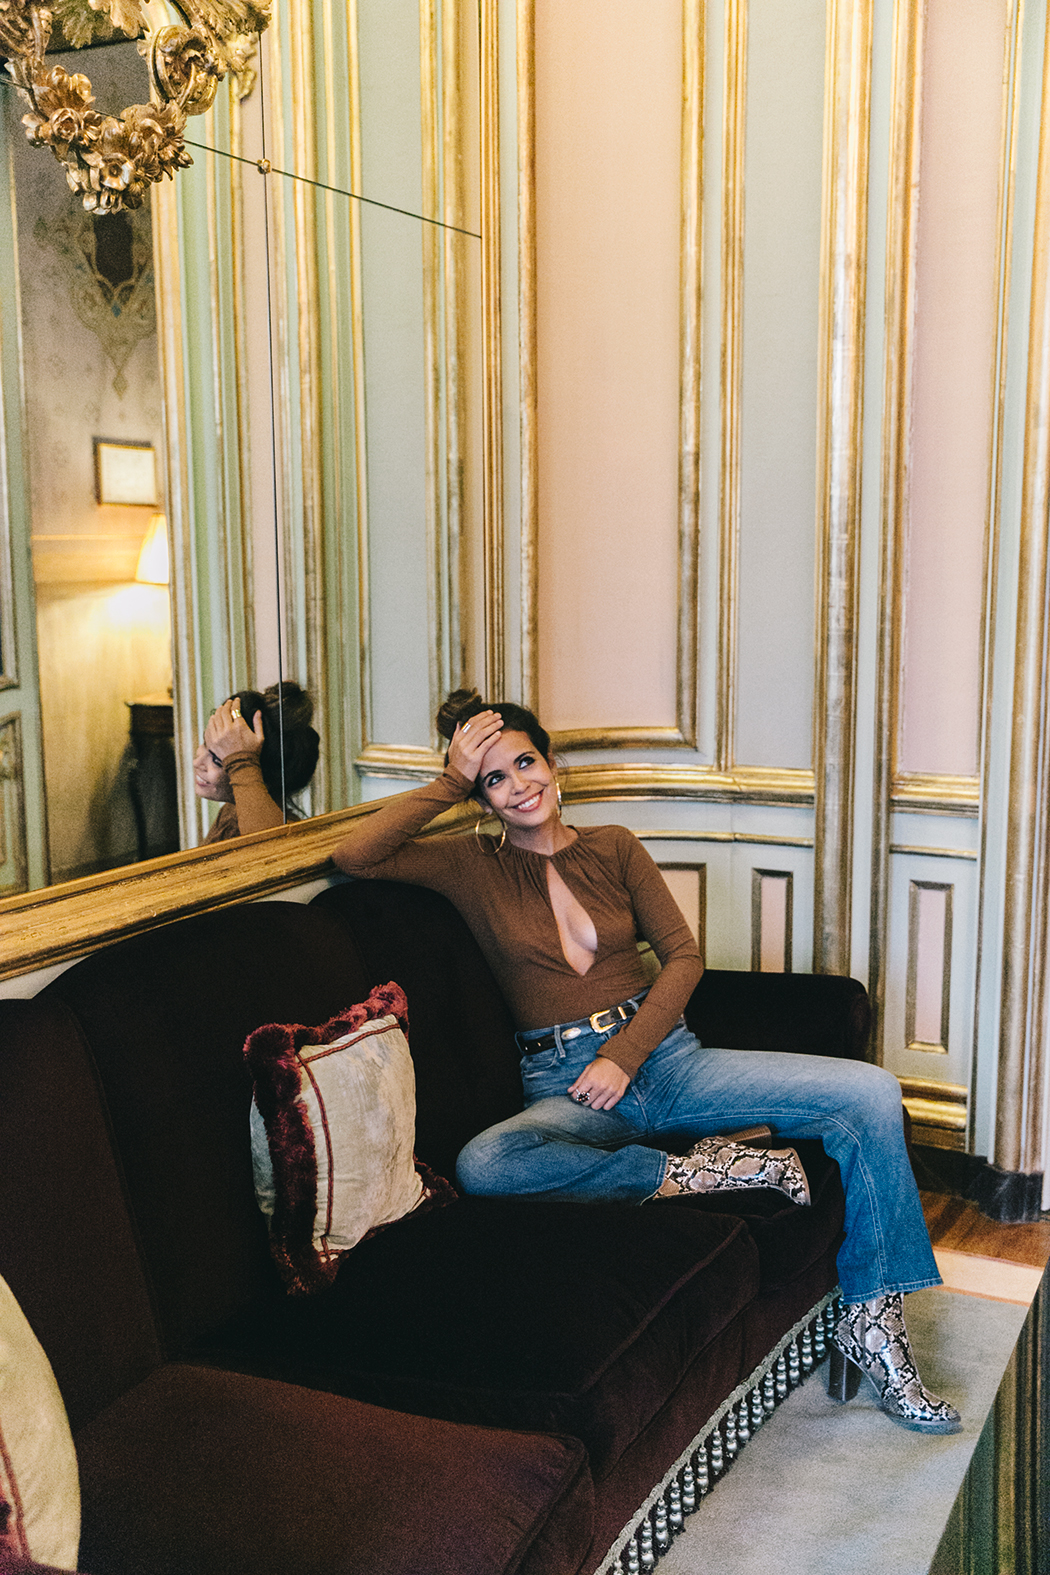 Luisa_Via_Roma-Firenze_For_Ever-Camel_Body-Reformation-Mother_Jeans-Snake_Boots-Hoop_Earrings-Outfit-Collage_Vintage-Florence-Villa_Cora_Hotel-71